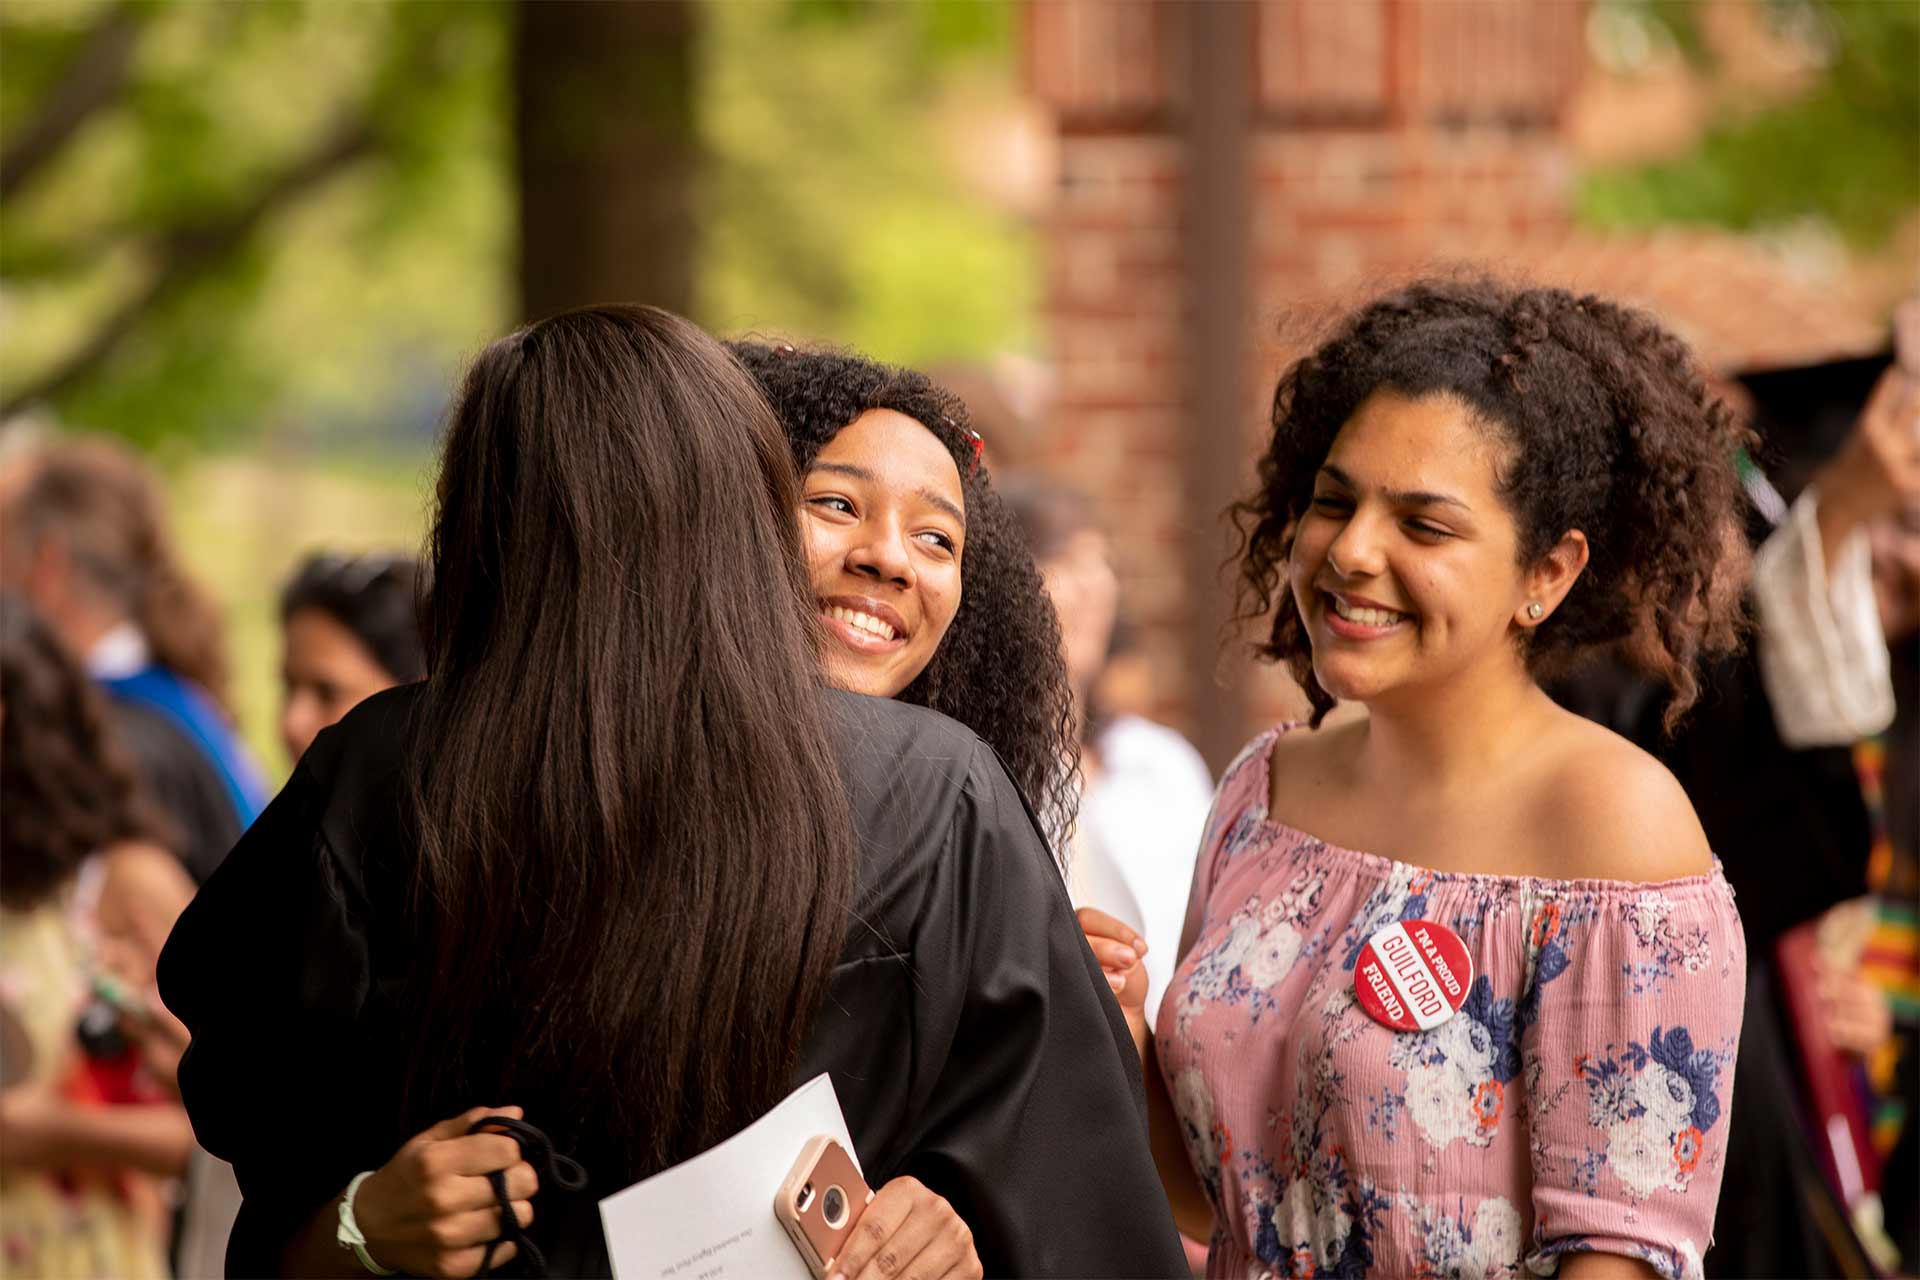 A graduate gets hugs of congratulations from friends after Commencement.